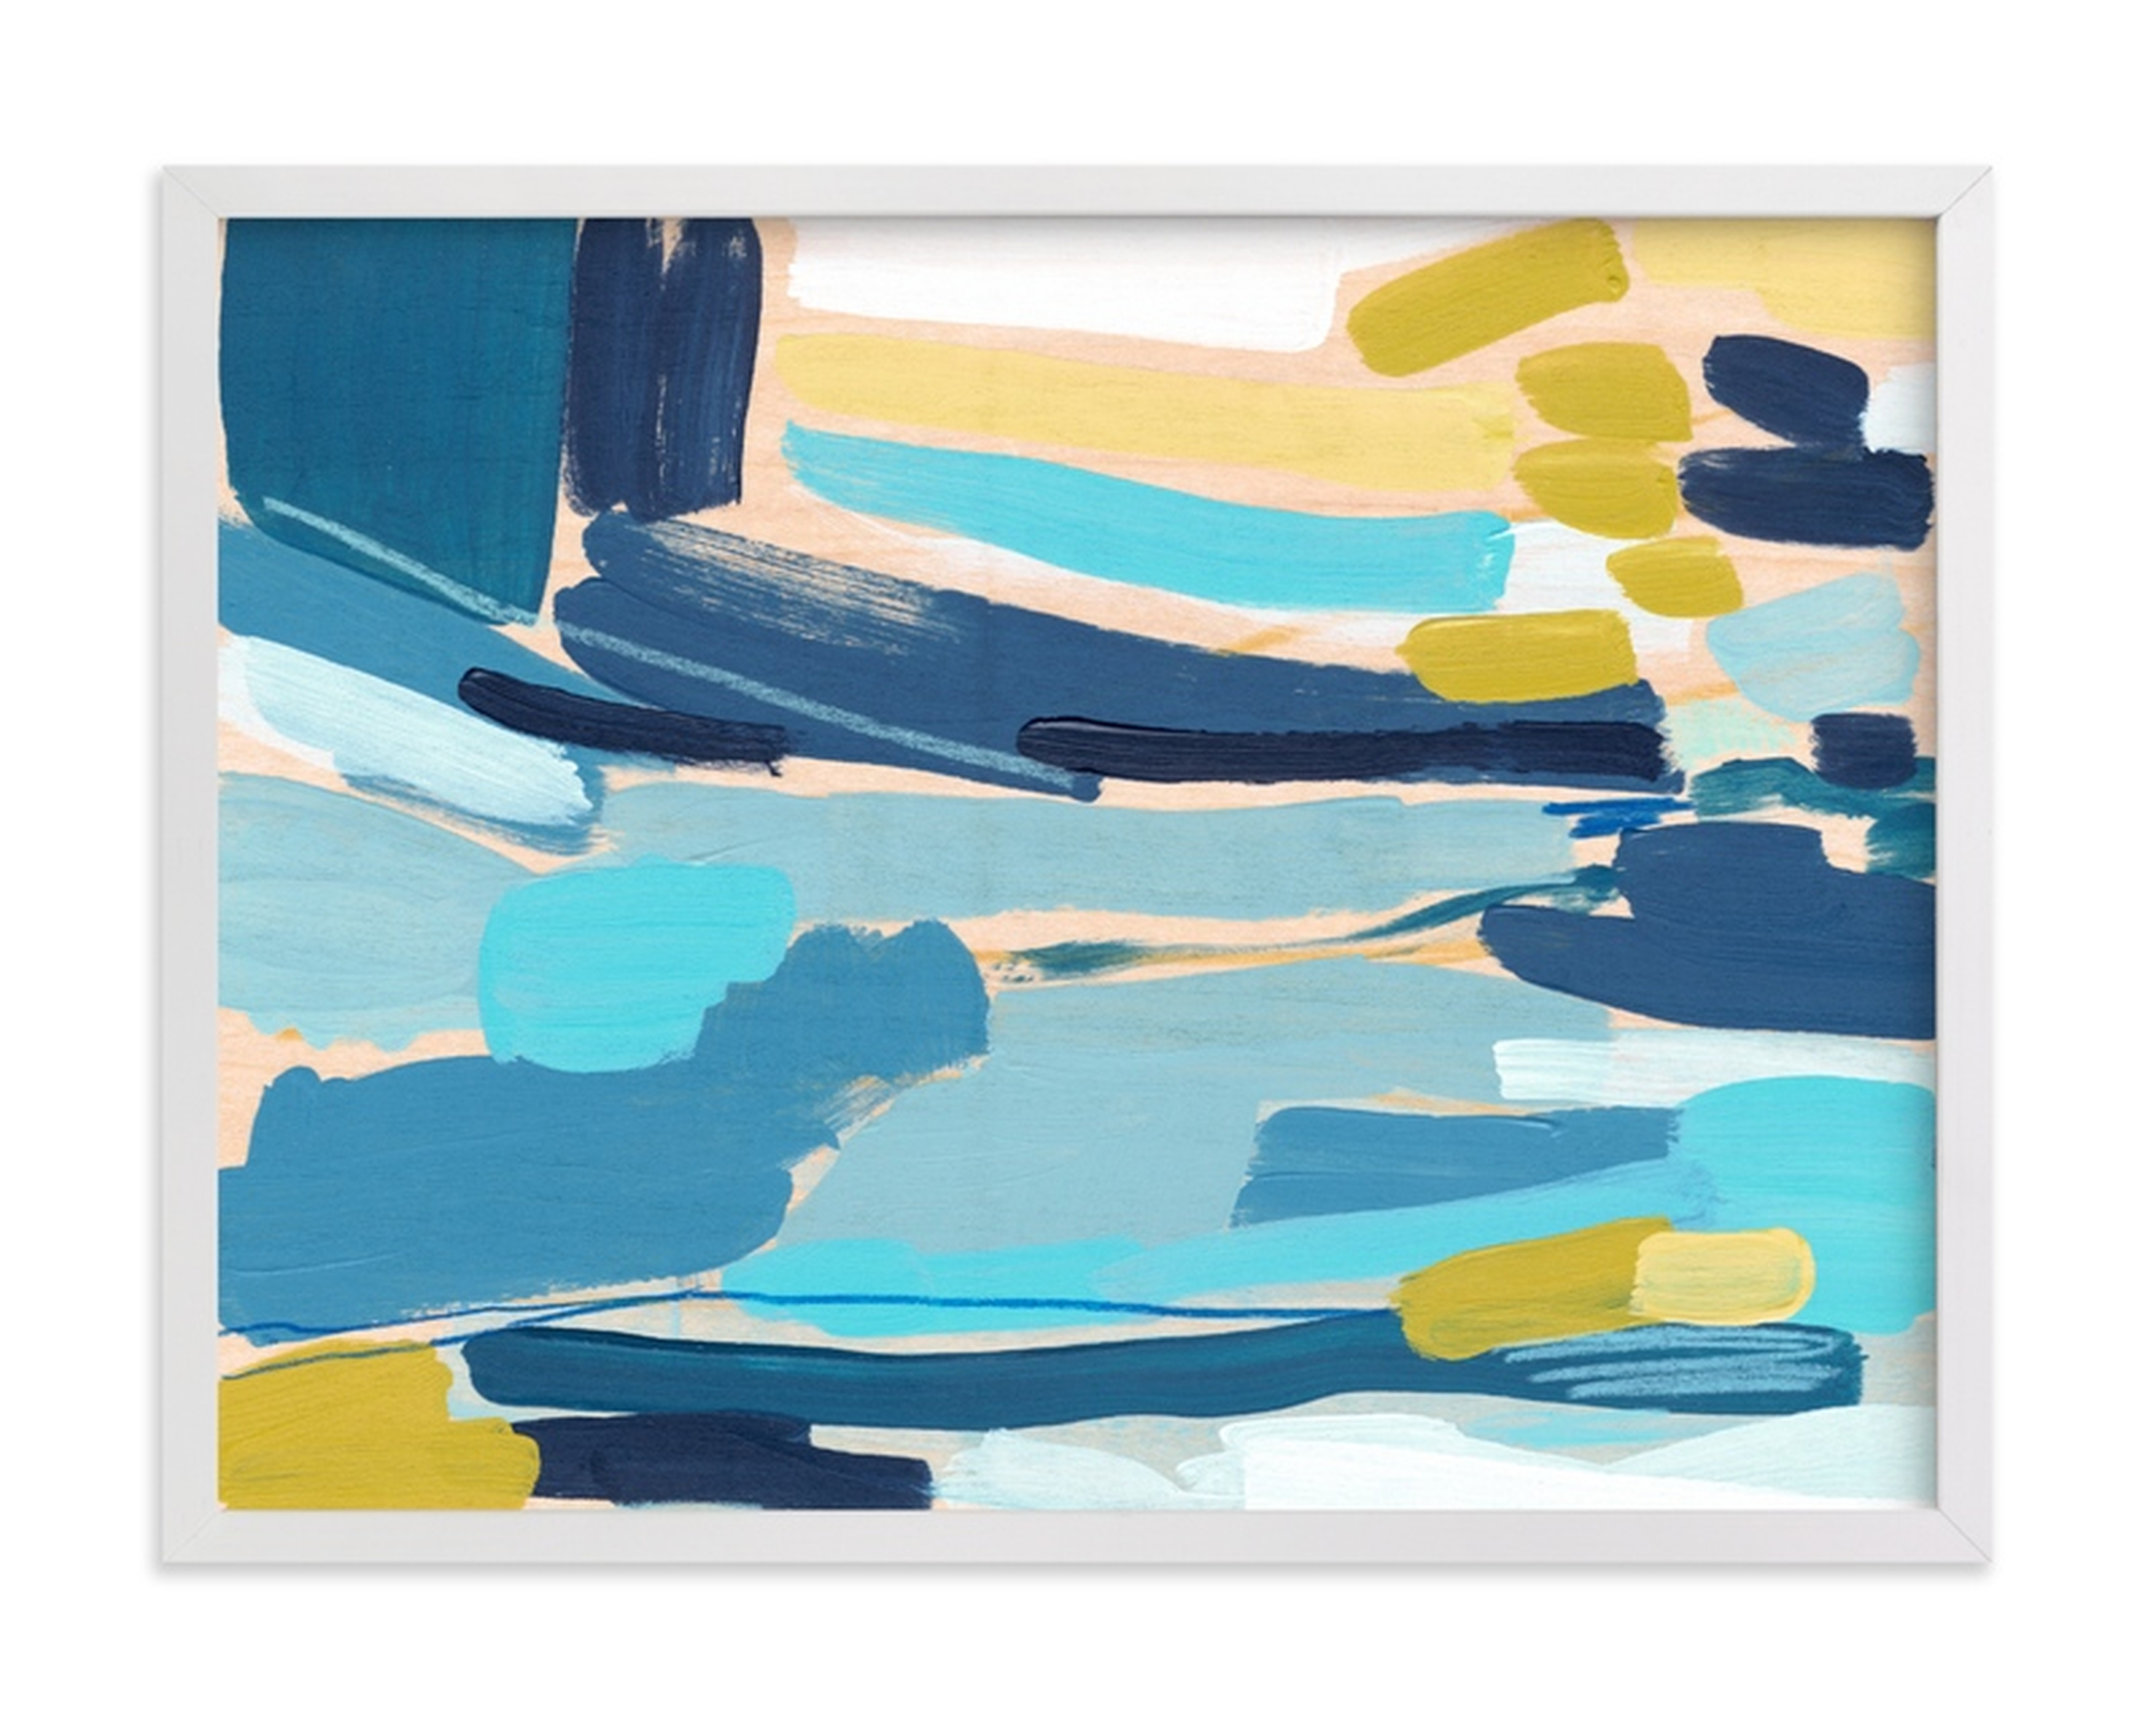 Flatlands limited edition print by Katie Craig, 24" x 18", Standard Plexi & Materials, White Wood Frame - Minted